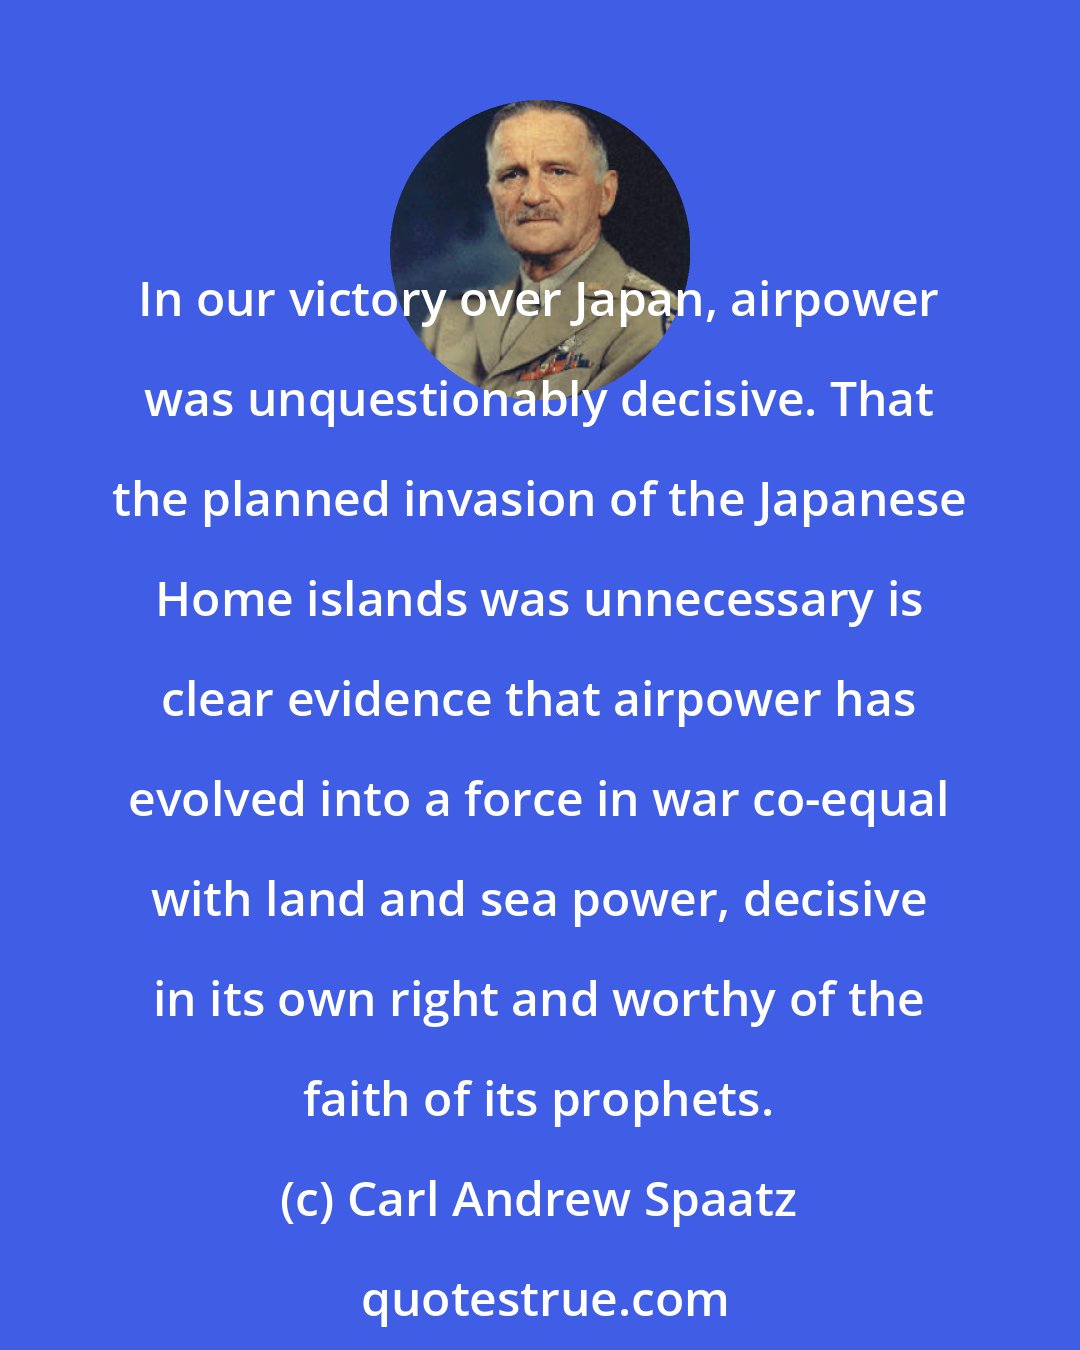 Carl Andrew Spaatz: In our victory over Japan, airpower was unquestionably decisive. That the planned invasion of the Japanese Home islands was unnecessary is clear evidence that airpower has evolved into a force in war co-equal with land and sea power, decisive in its own right and worthy of the faith of its prophets.